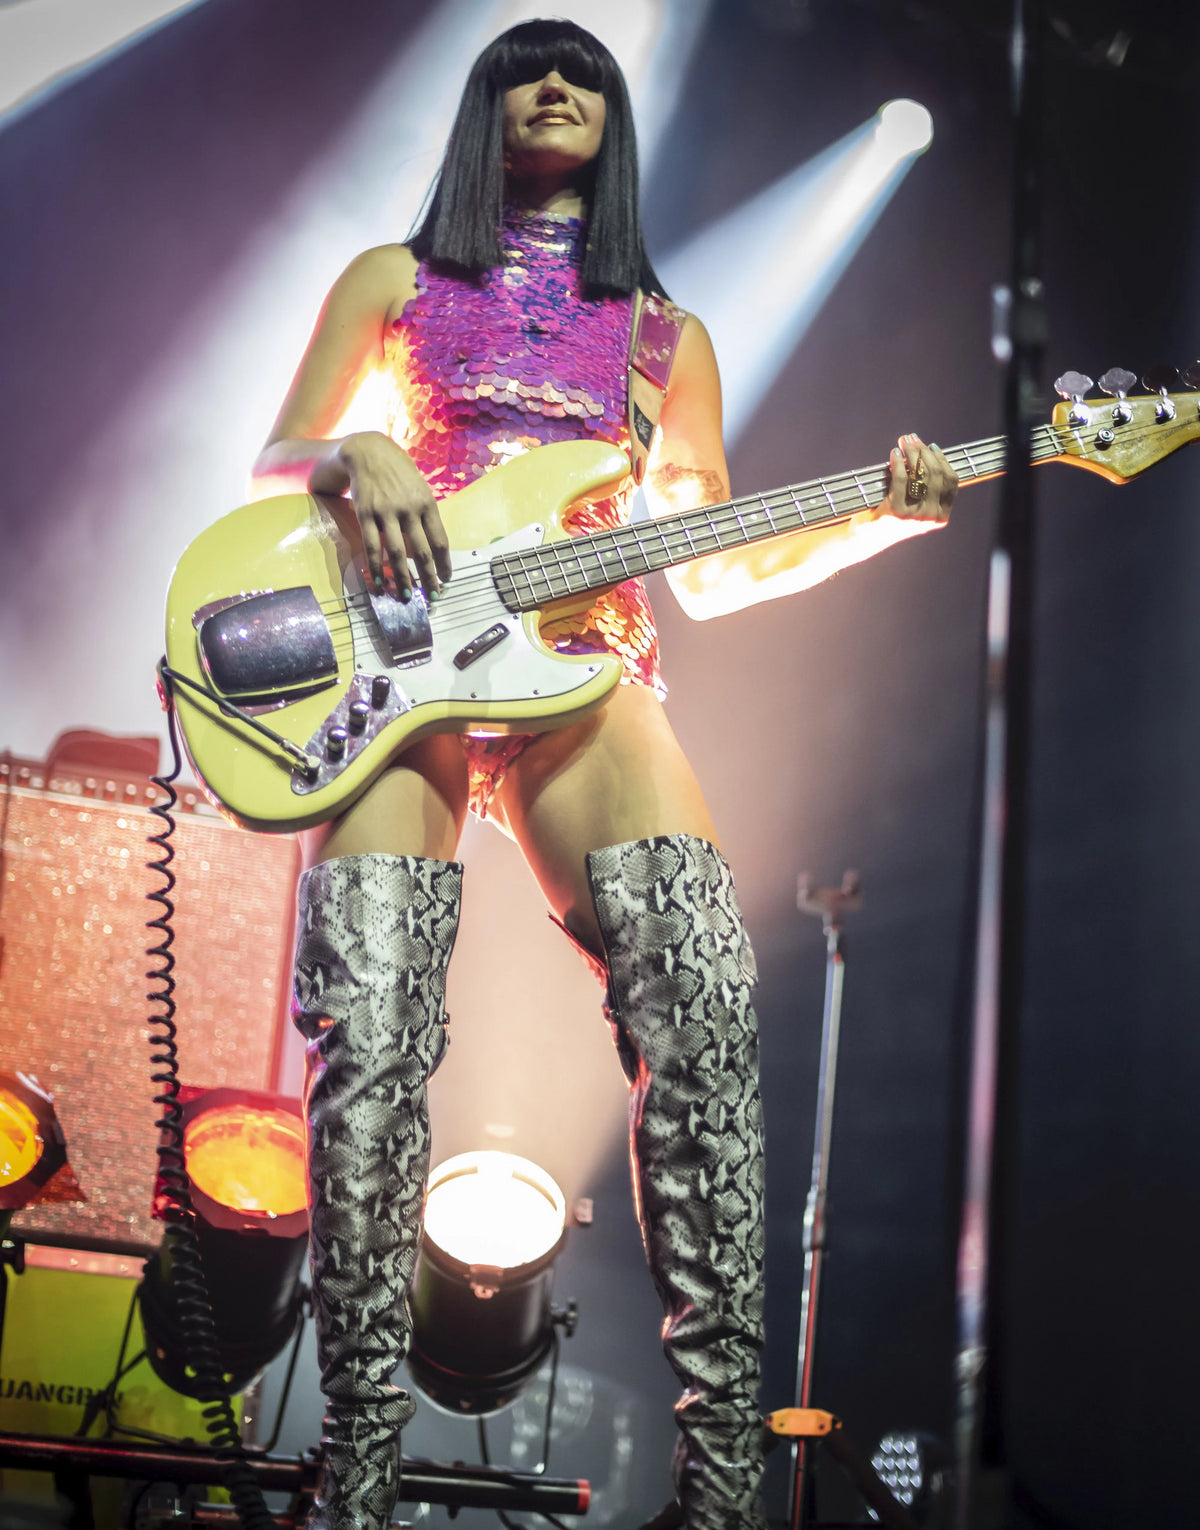 Laura Leezy on stage playing the bass guitar wearing thigh high snake skin boots and high neck leotard covered in large round iridescent hot pink sequins